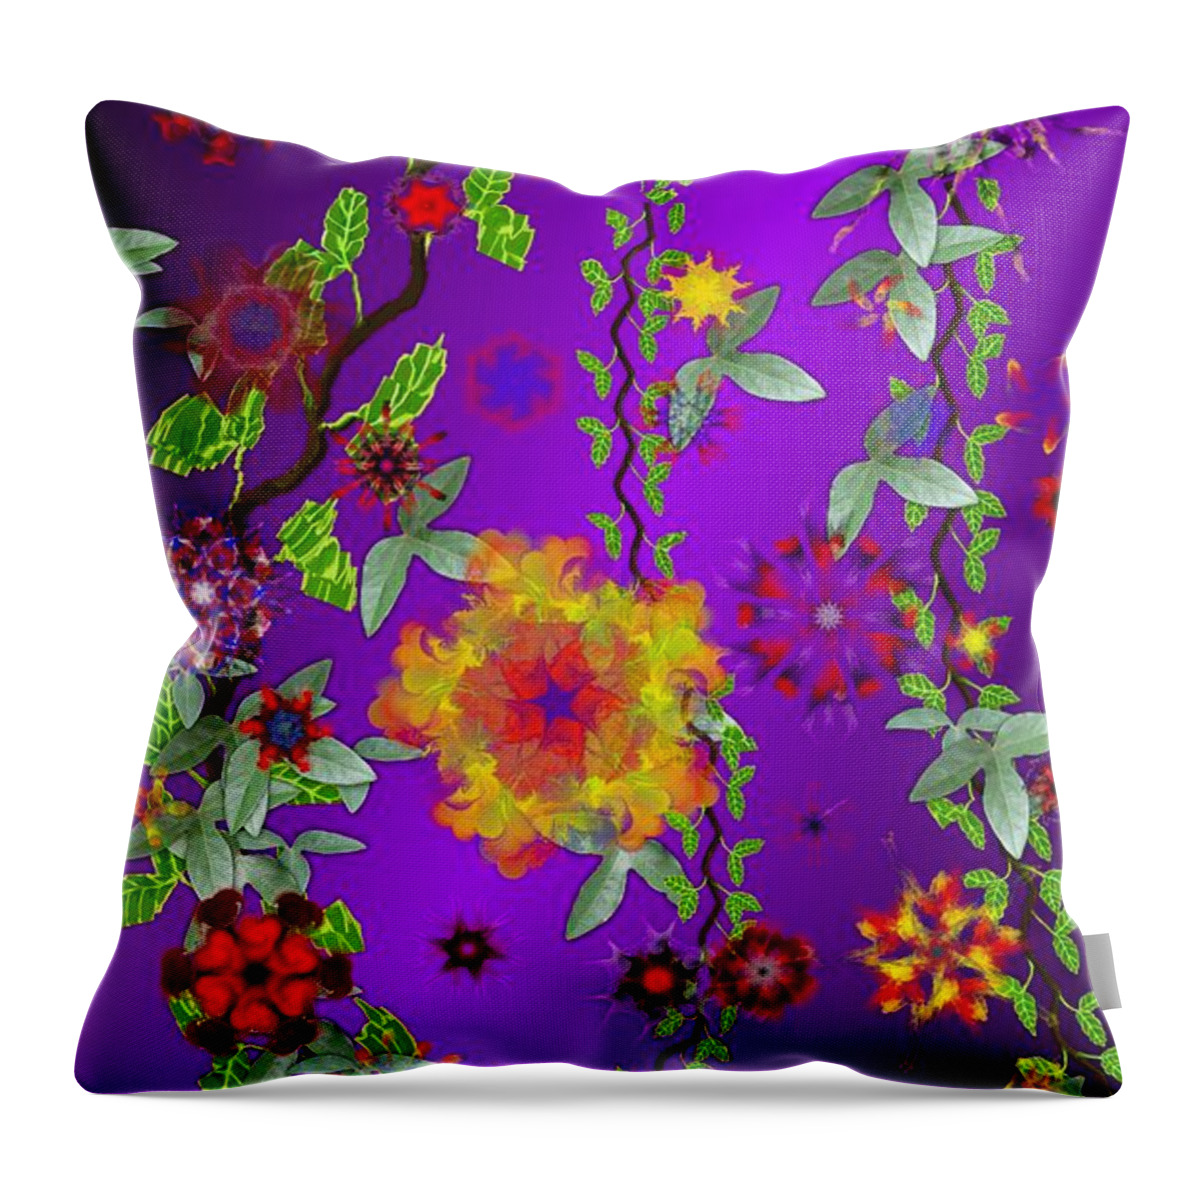 Flower Throw Pillow featuring the digital art Floral Fantasy 122410 by David Lane